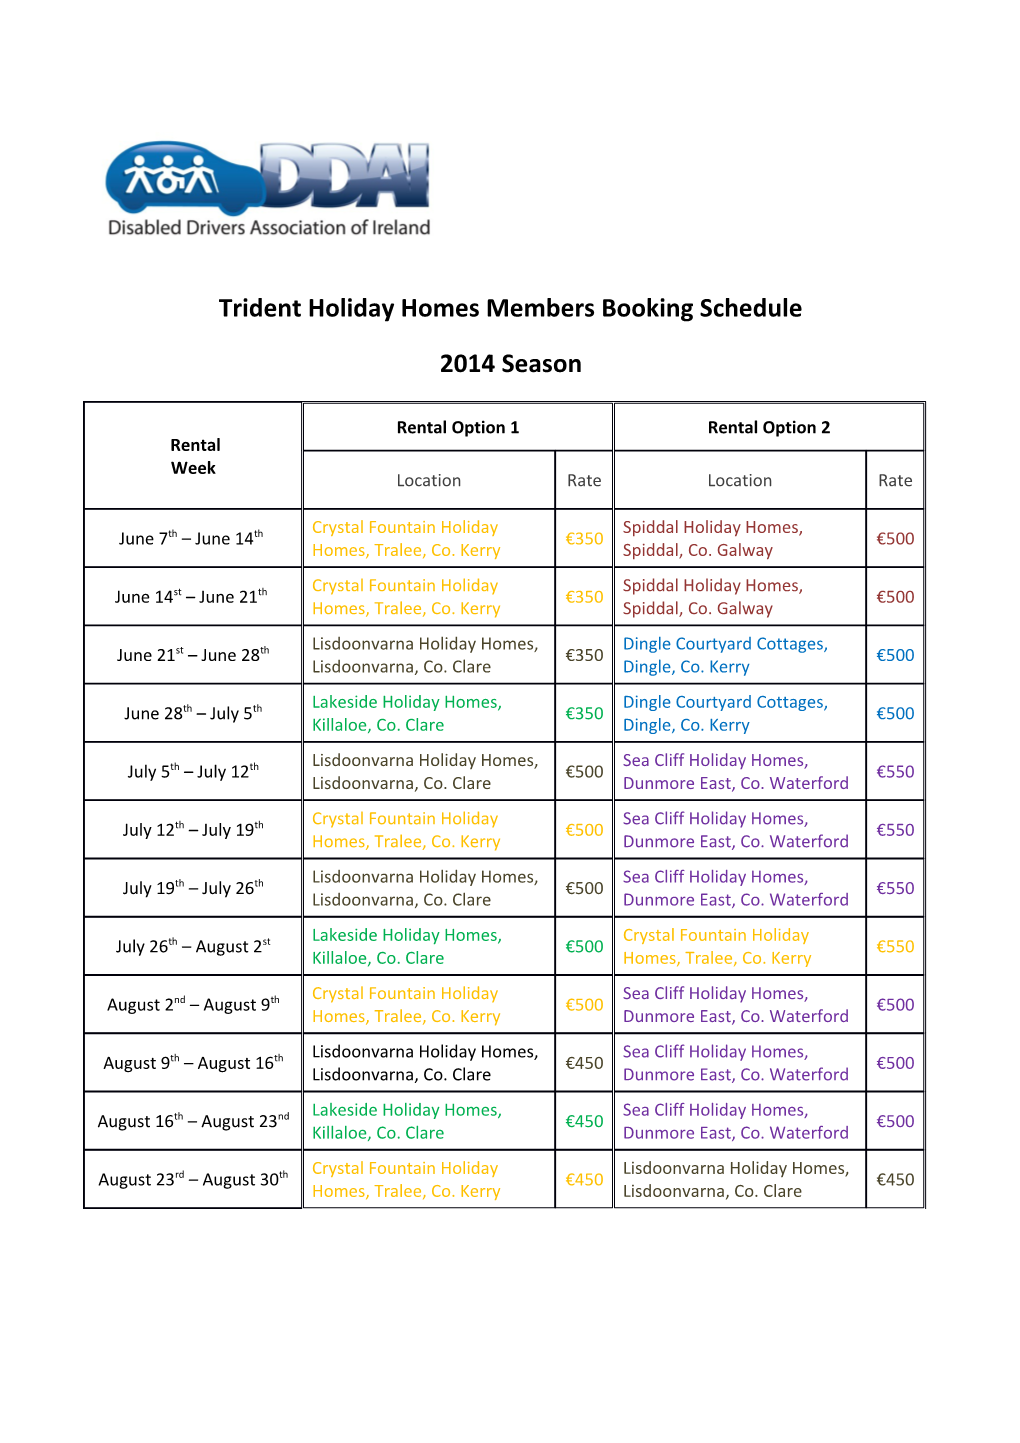 Trident Holiday Homes Members Booking Schedule